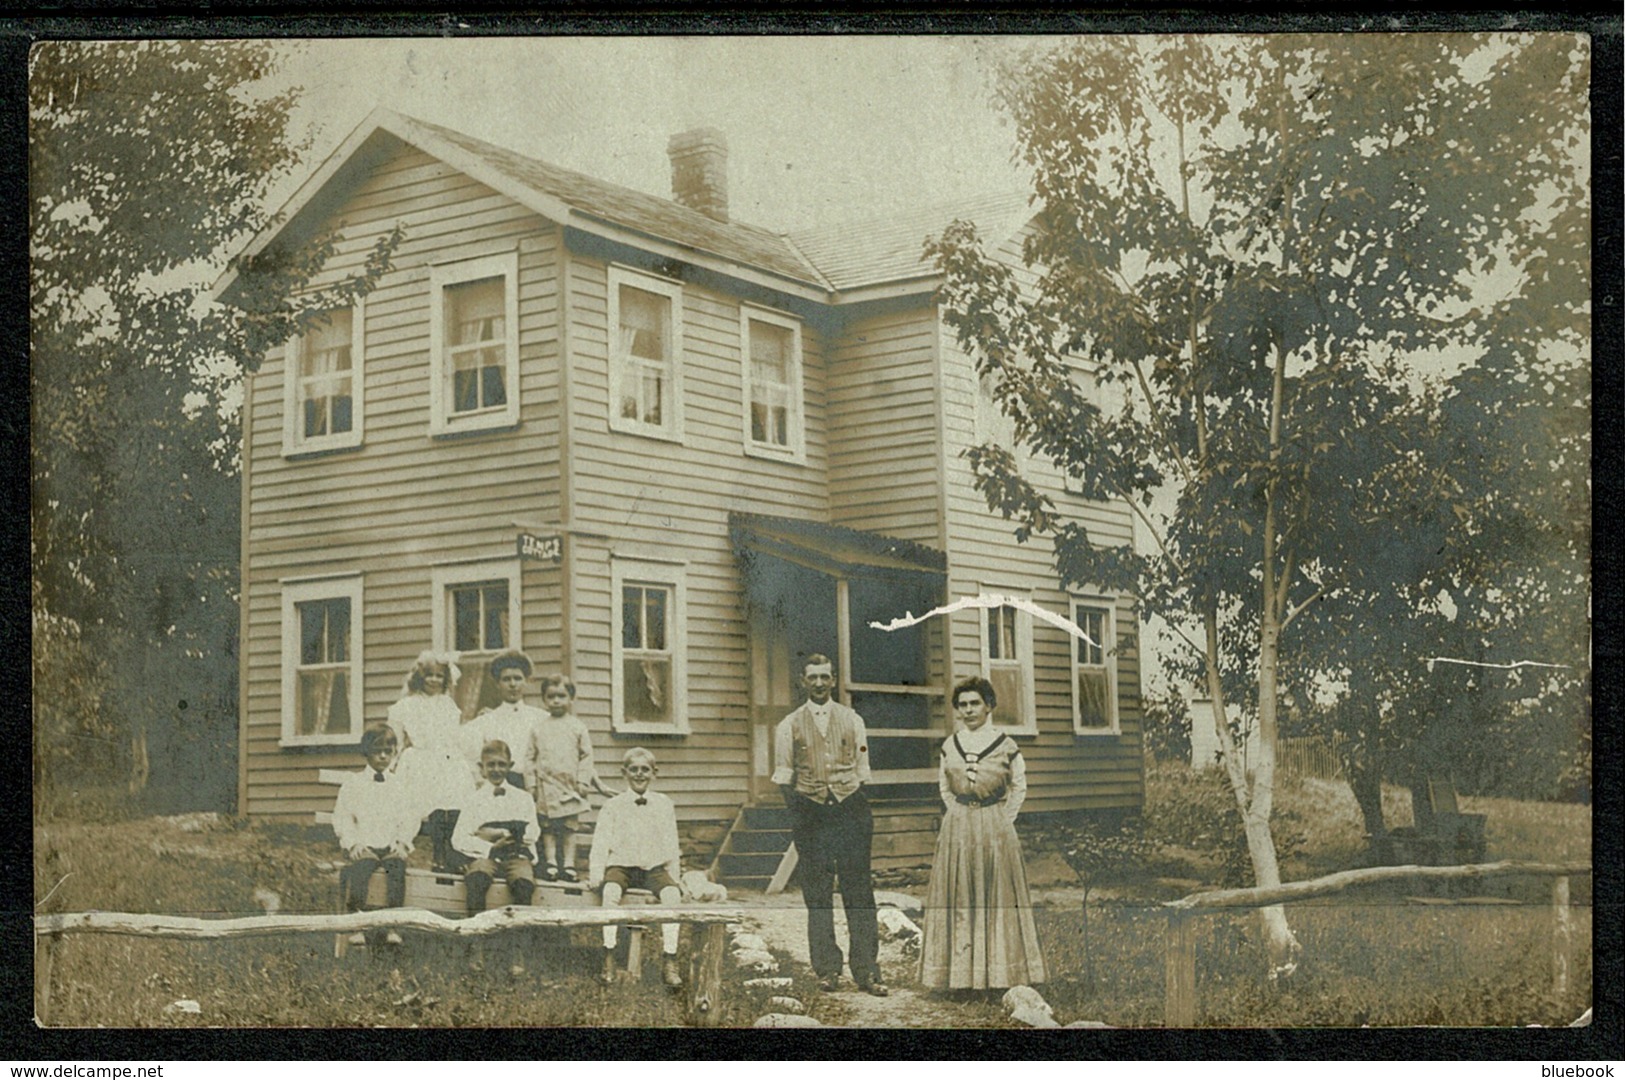 Ref 1304 - Real Photo Postcard - Family Outside House In Catskill Mountains New York State USA - Catskills